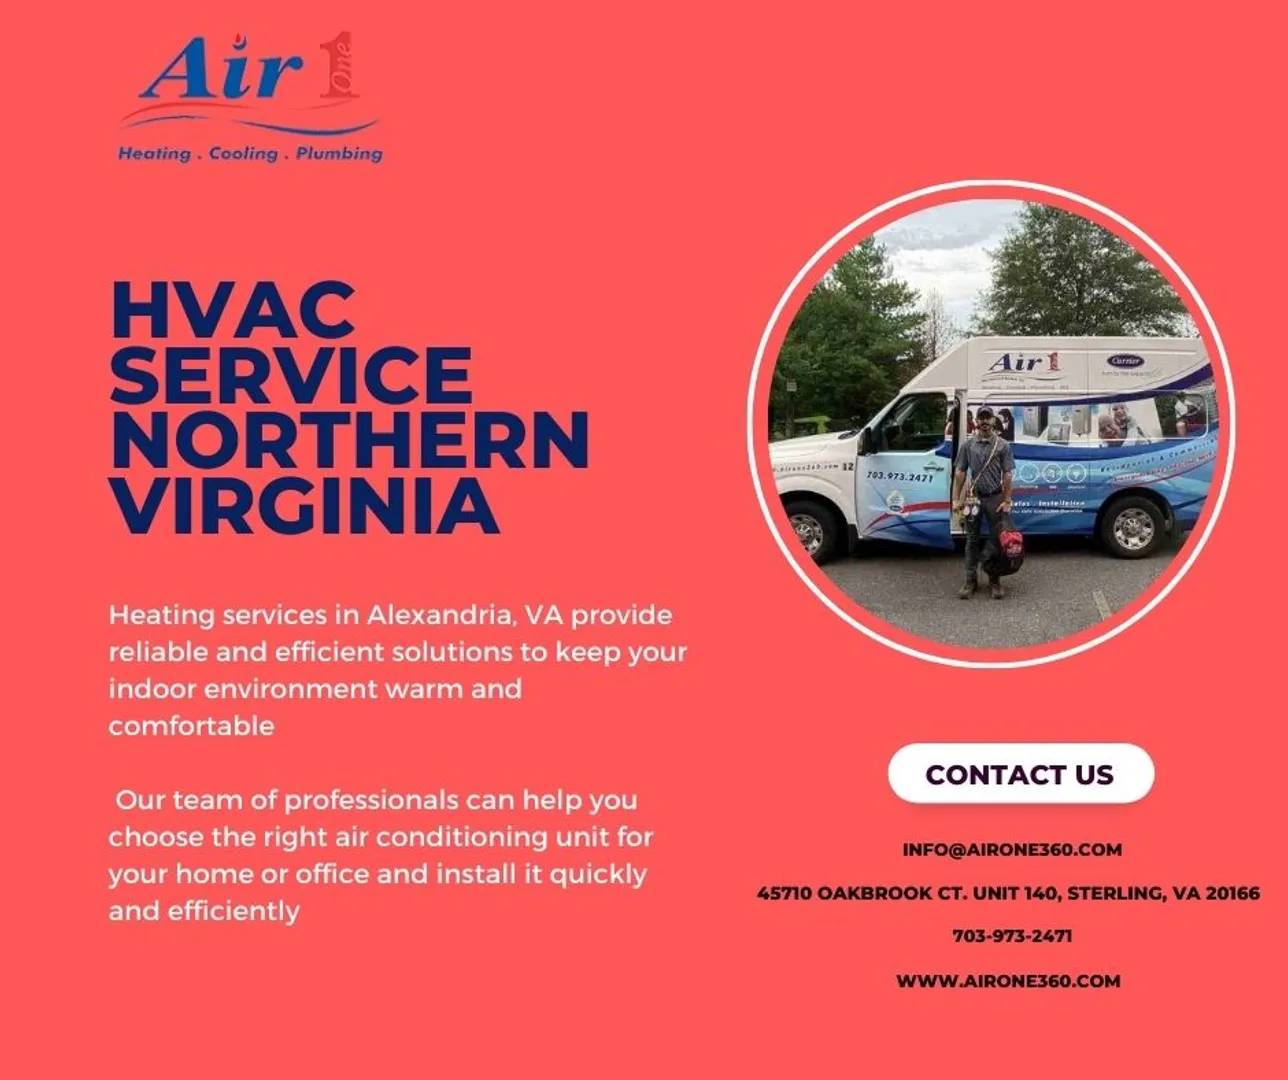 Air Conditioning Service Ashburn Va

If you are in need of air conditioning service in Ashburn, VA, we can help. We are a professional air conditioning service company that has been serving the Ashburn area for many years. We offer a wide range of air conditioning services, from repairs to installations to maintenance. No matter what your air conditioning needs are, we can help. We are proud to offer our air conditioning services at competitive prices. We also offer a 100% satisfaction guarantee on all of our work. We believe in our work and we stand behind it.

https://www.airone360.com/